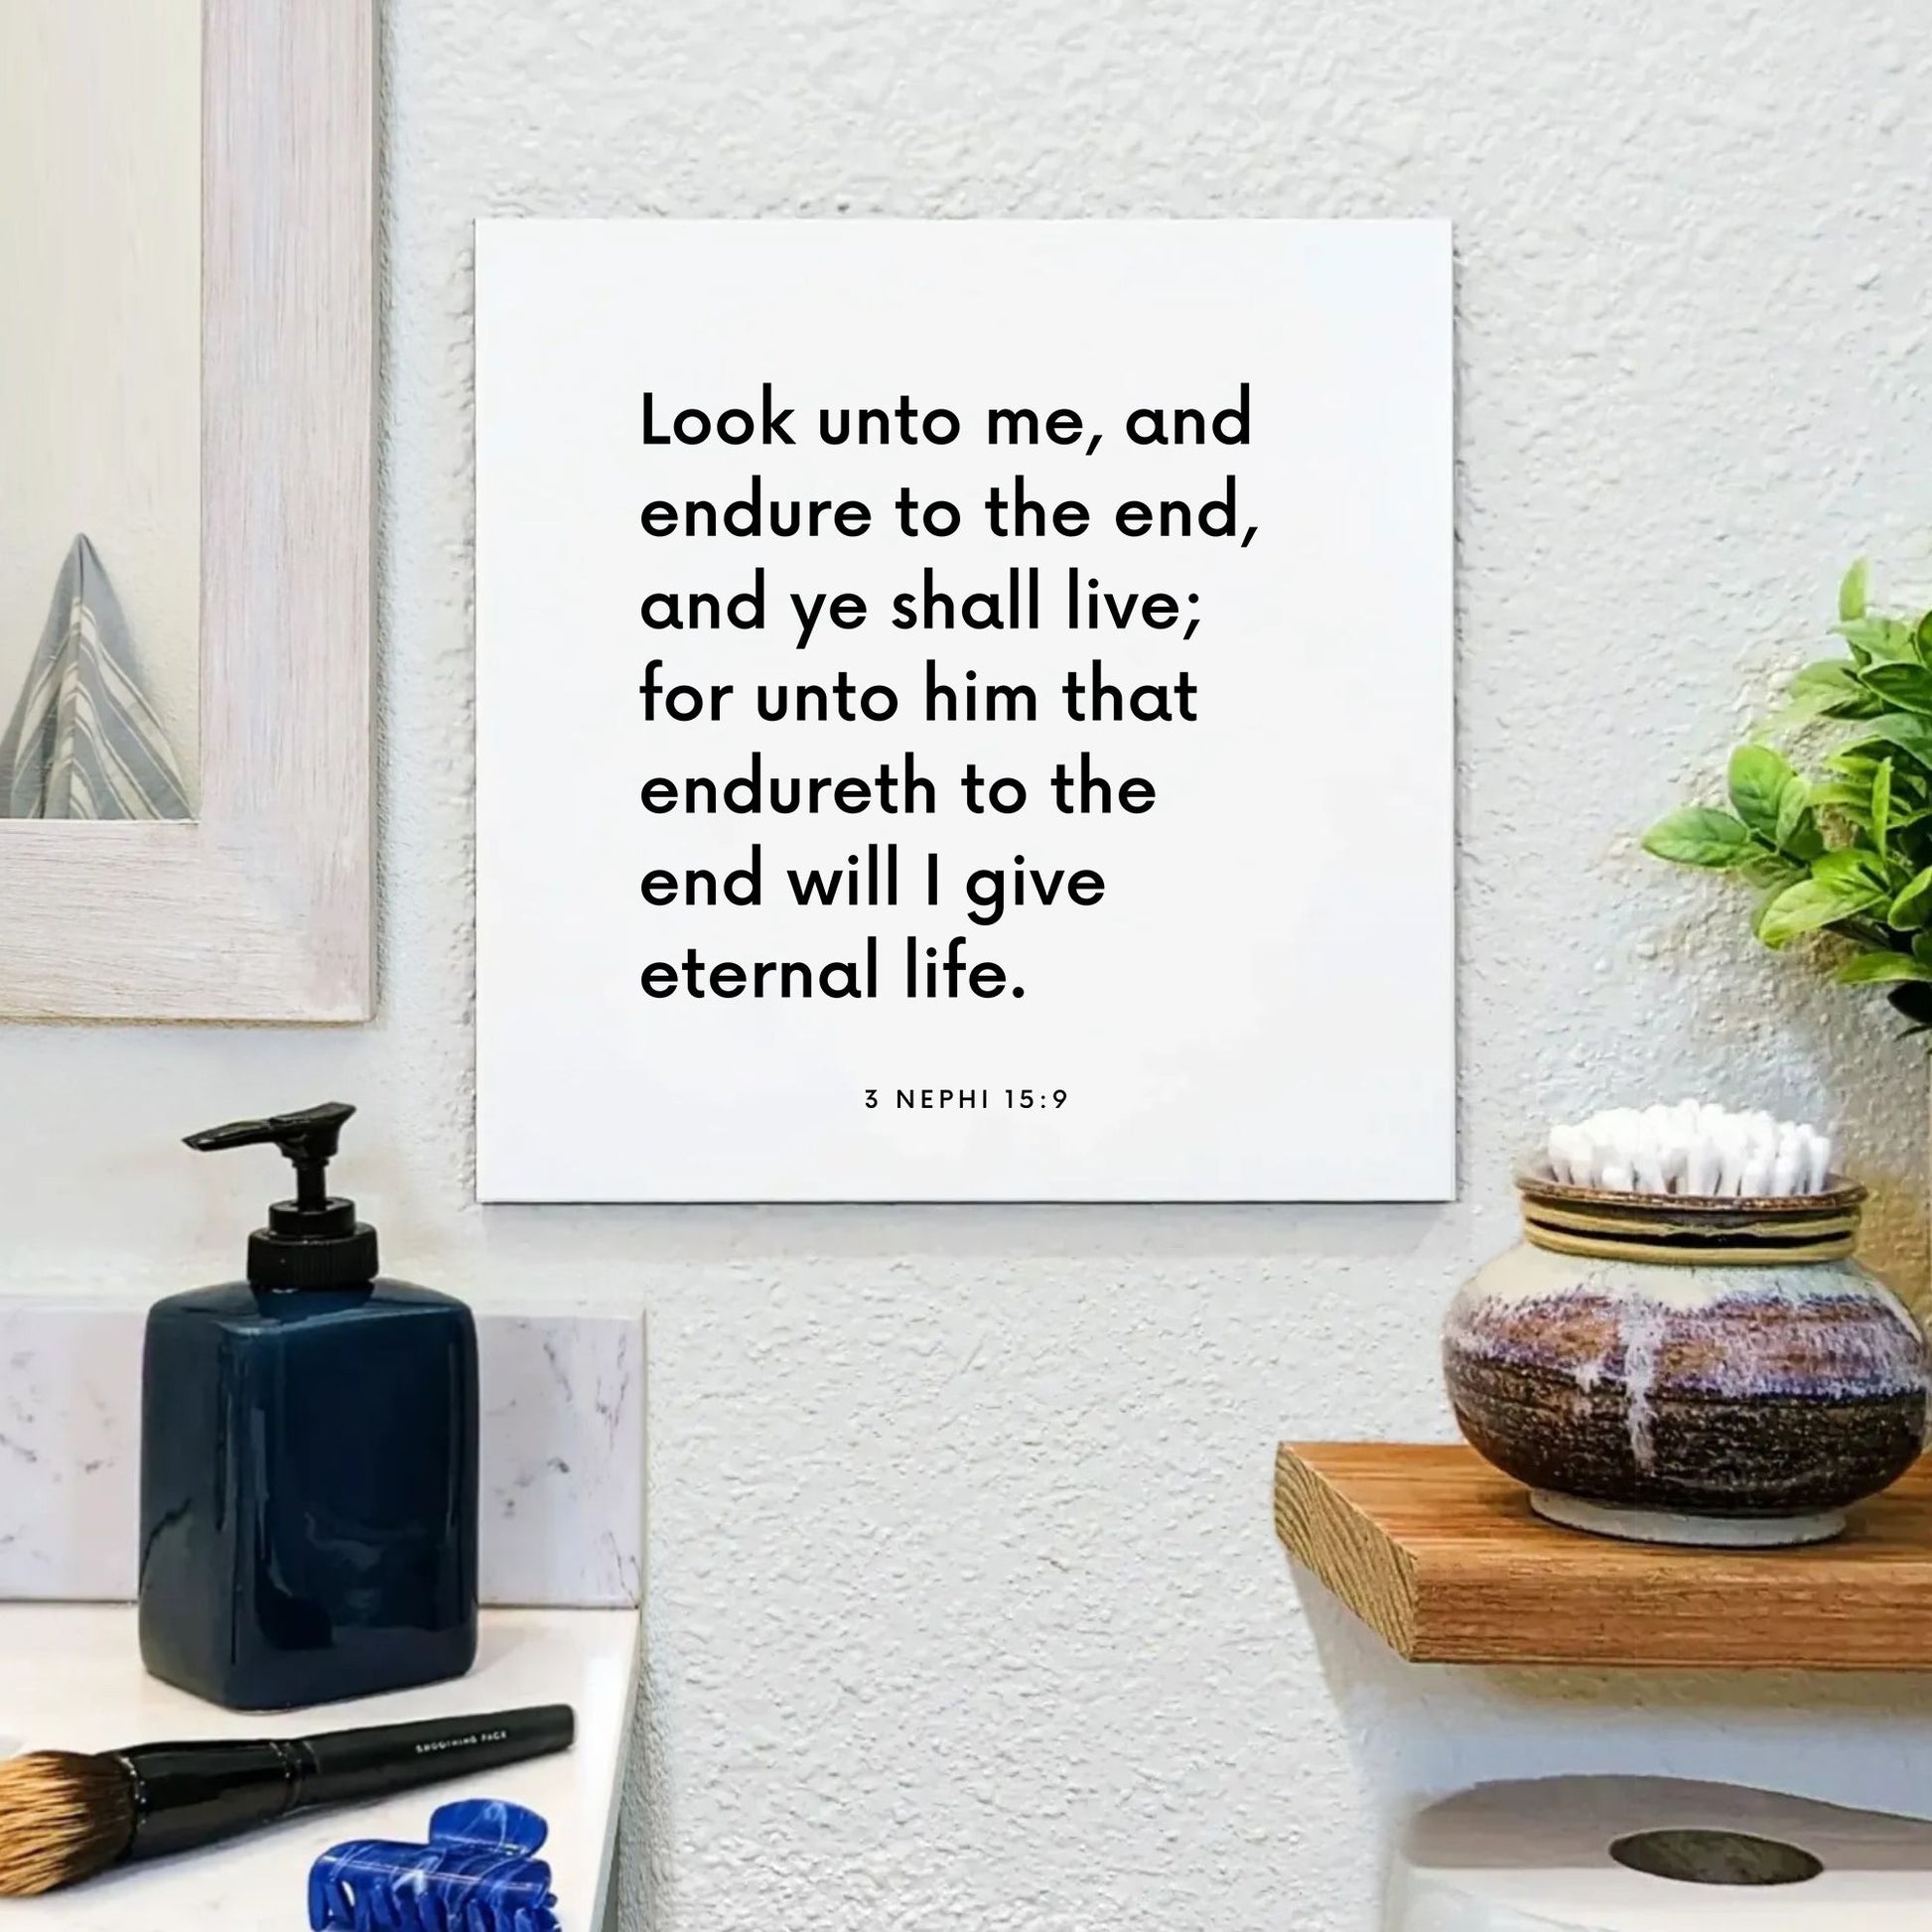 Bathroom mouting of the scripture tile for 3 Nephi 15:9 - "Look unto me, and endure to the end, and ye shall live"